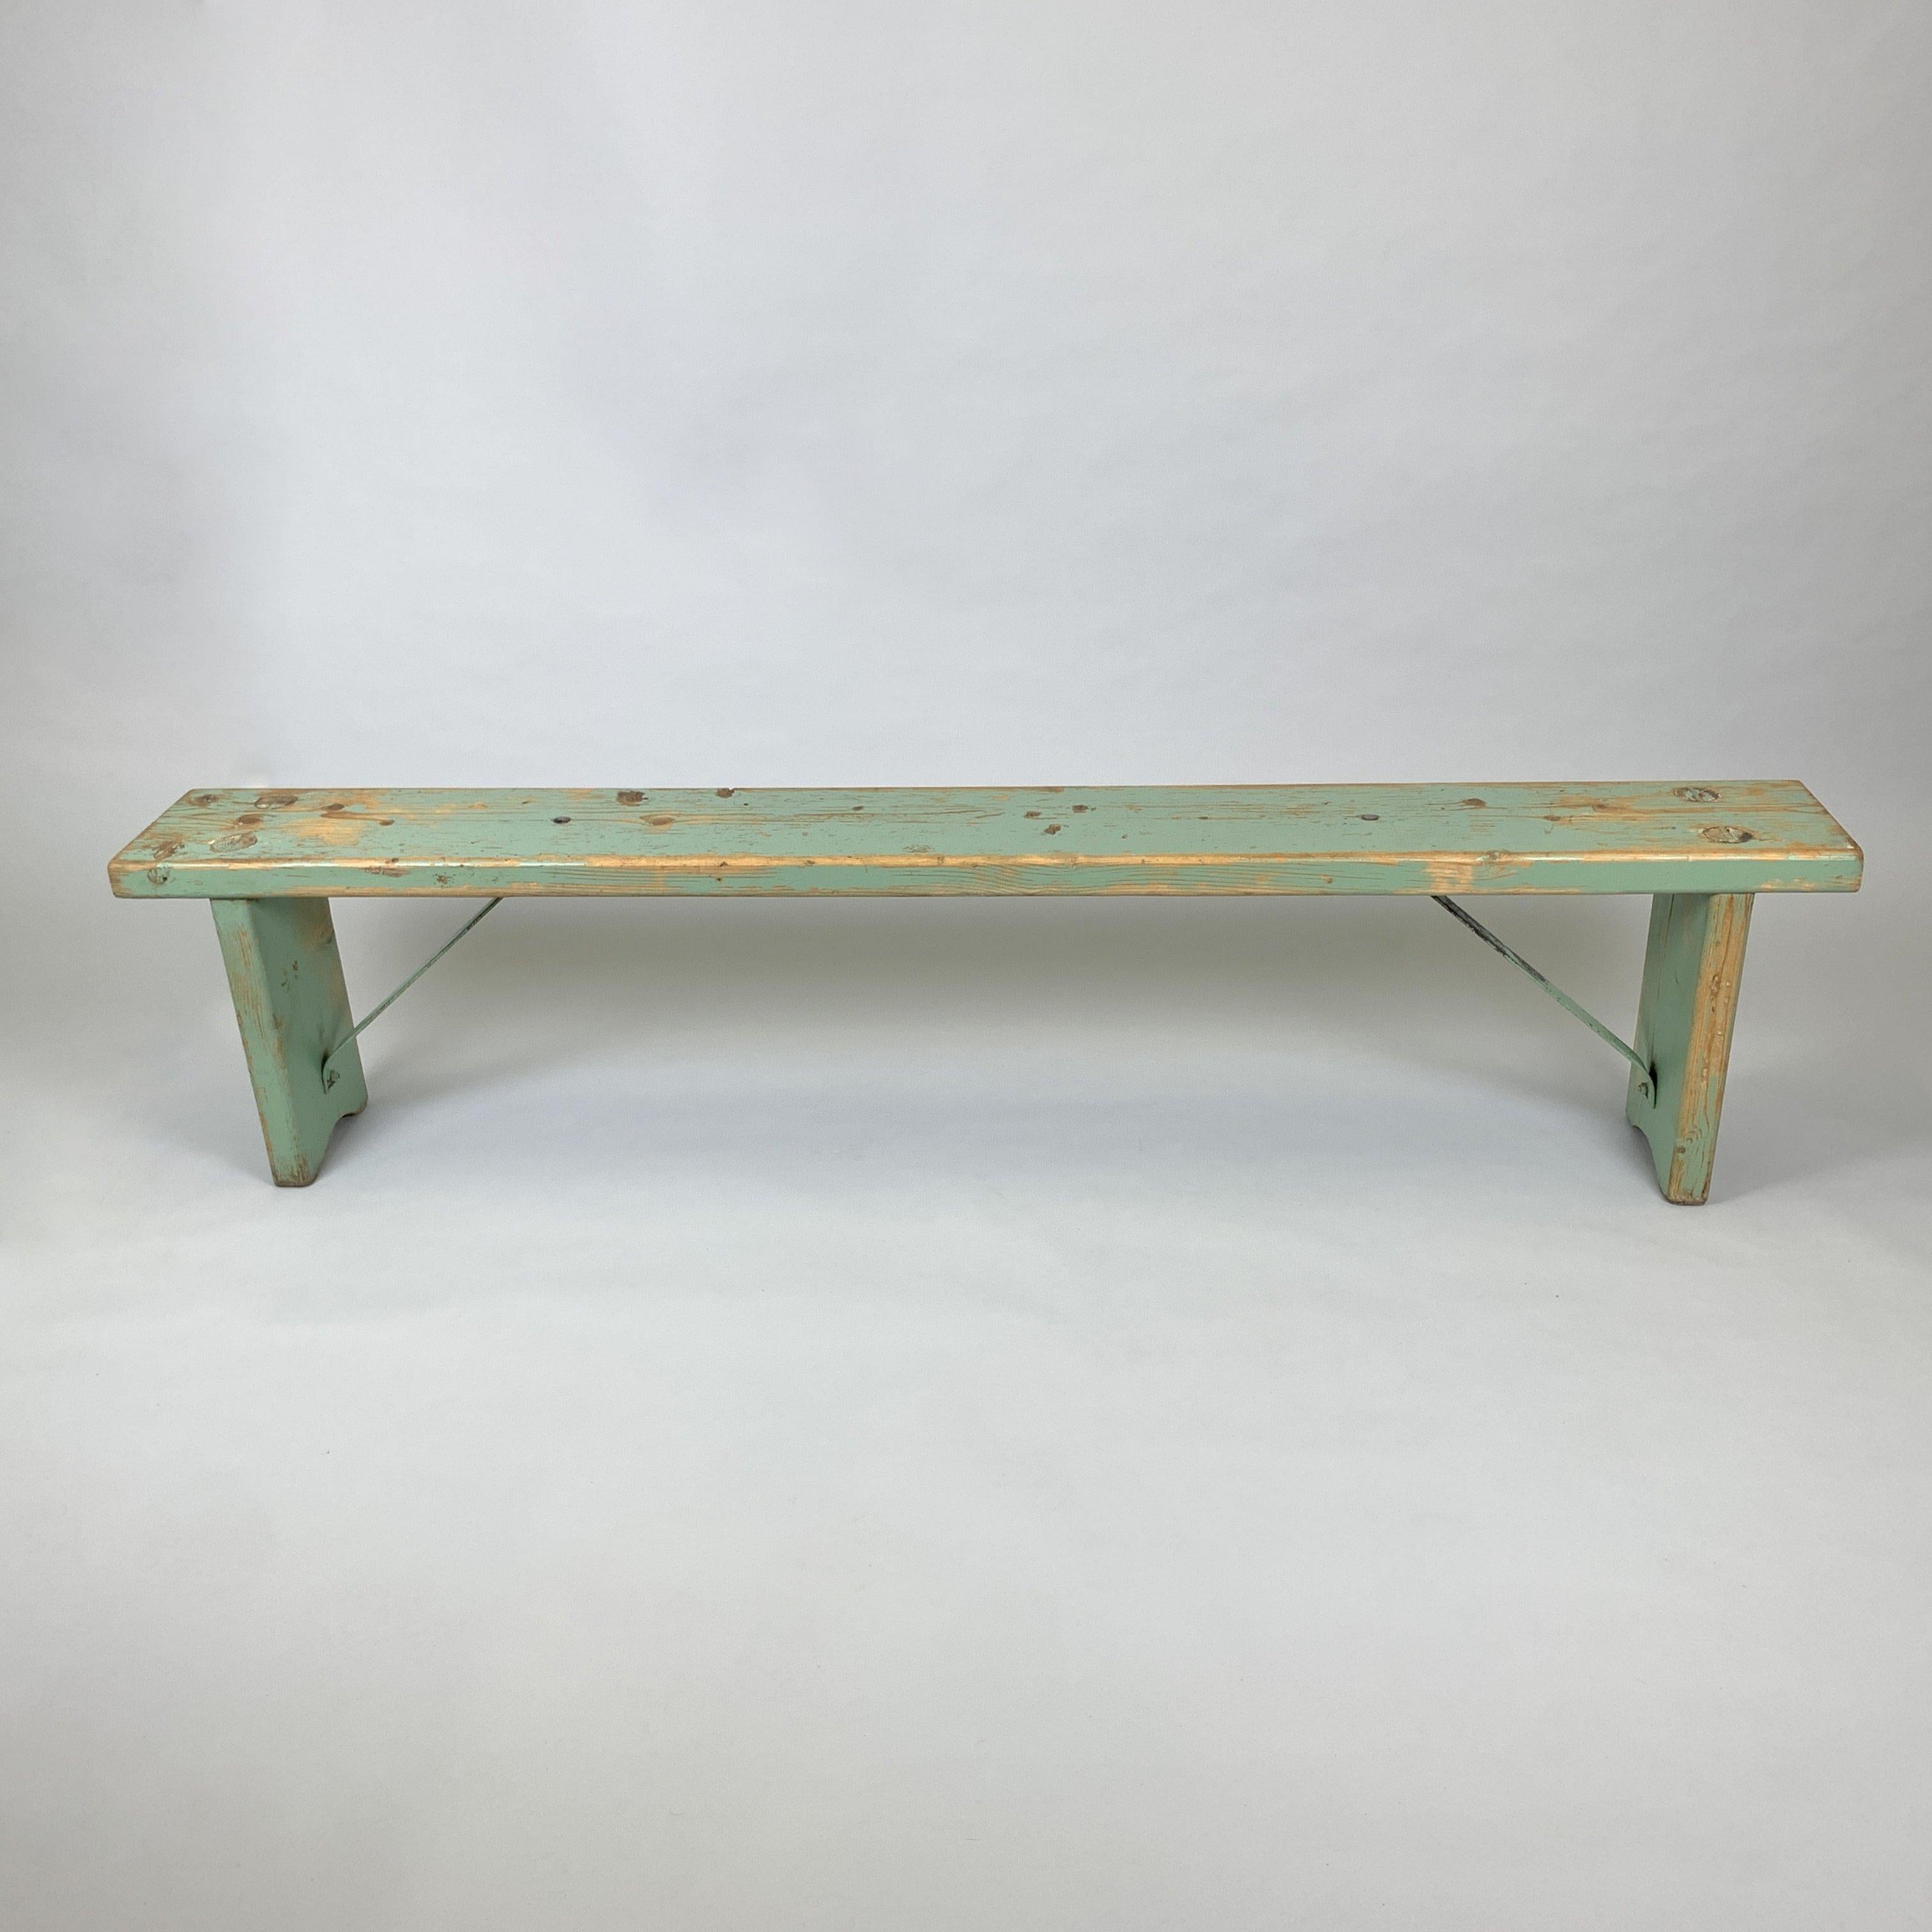 Vintage wooden bench from a factory in former Czechoslovakia.
Cleaned and waxed.